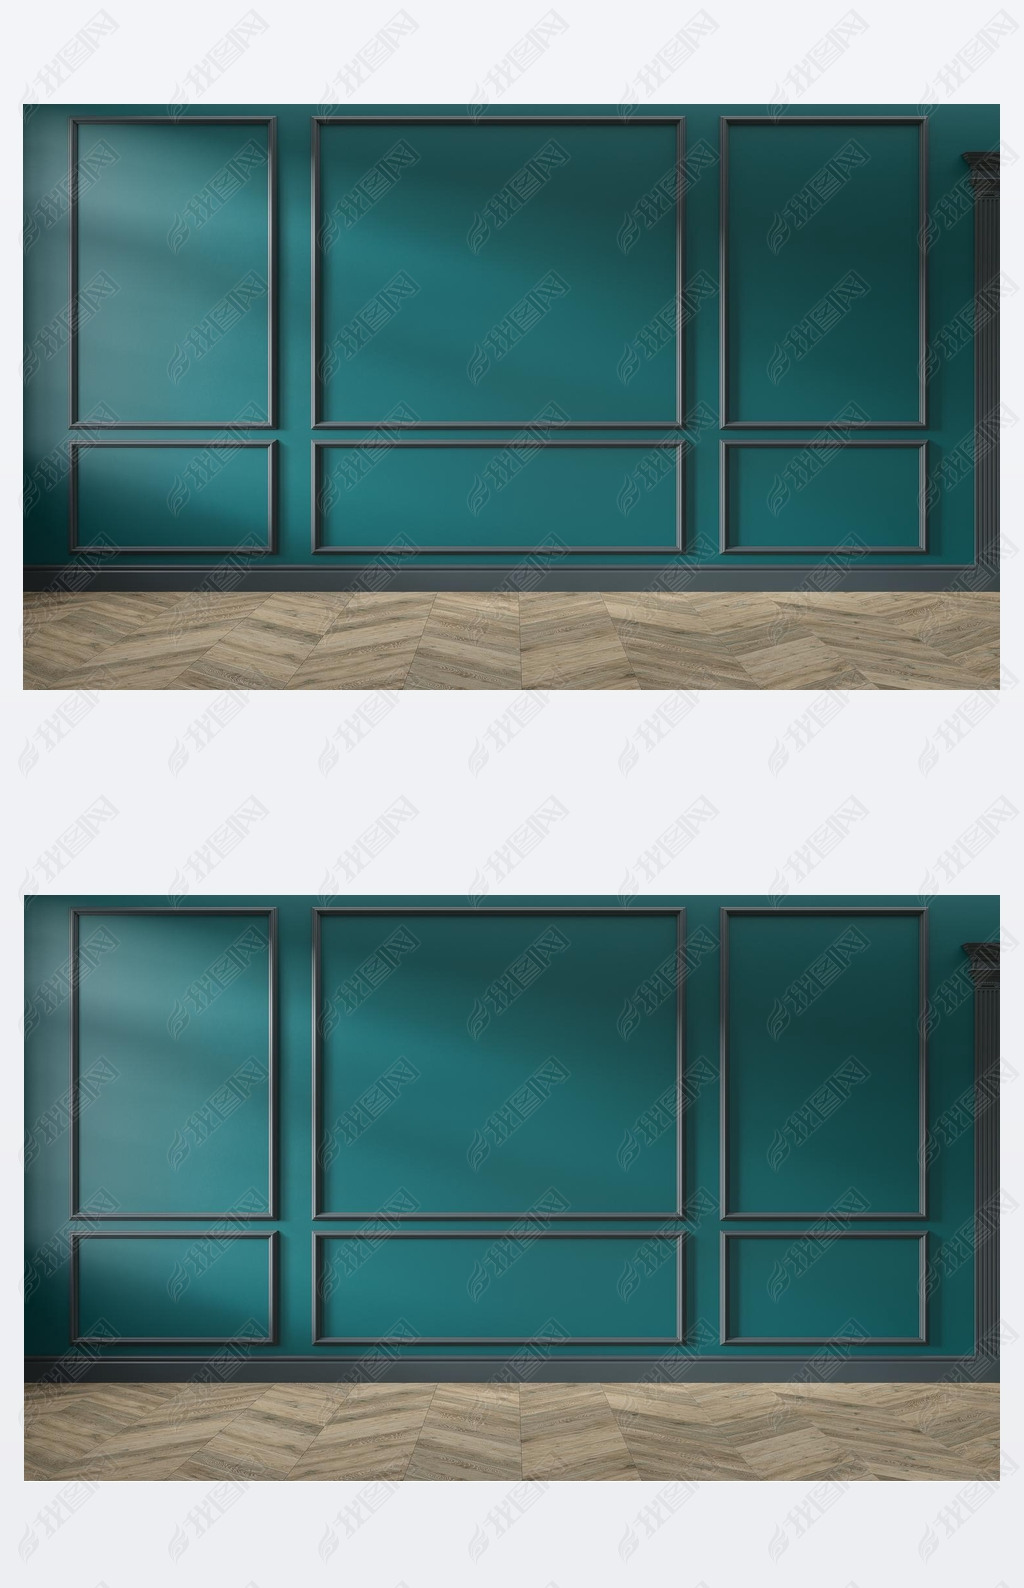 Modern classic green, turquoise color empty interior with wall panels, mouldings and wooden floor. 3